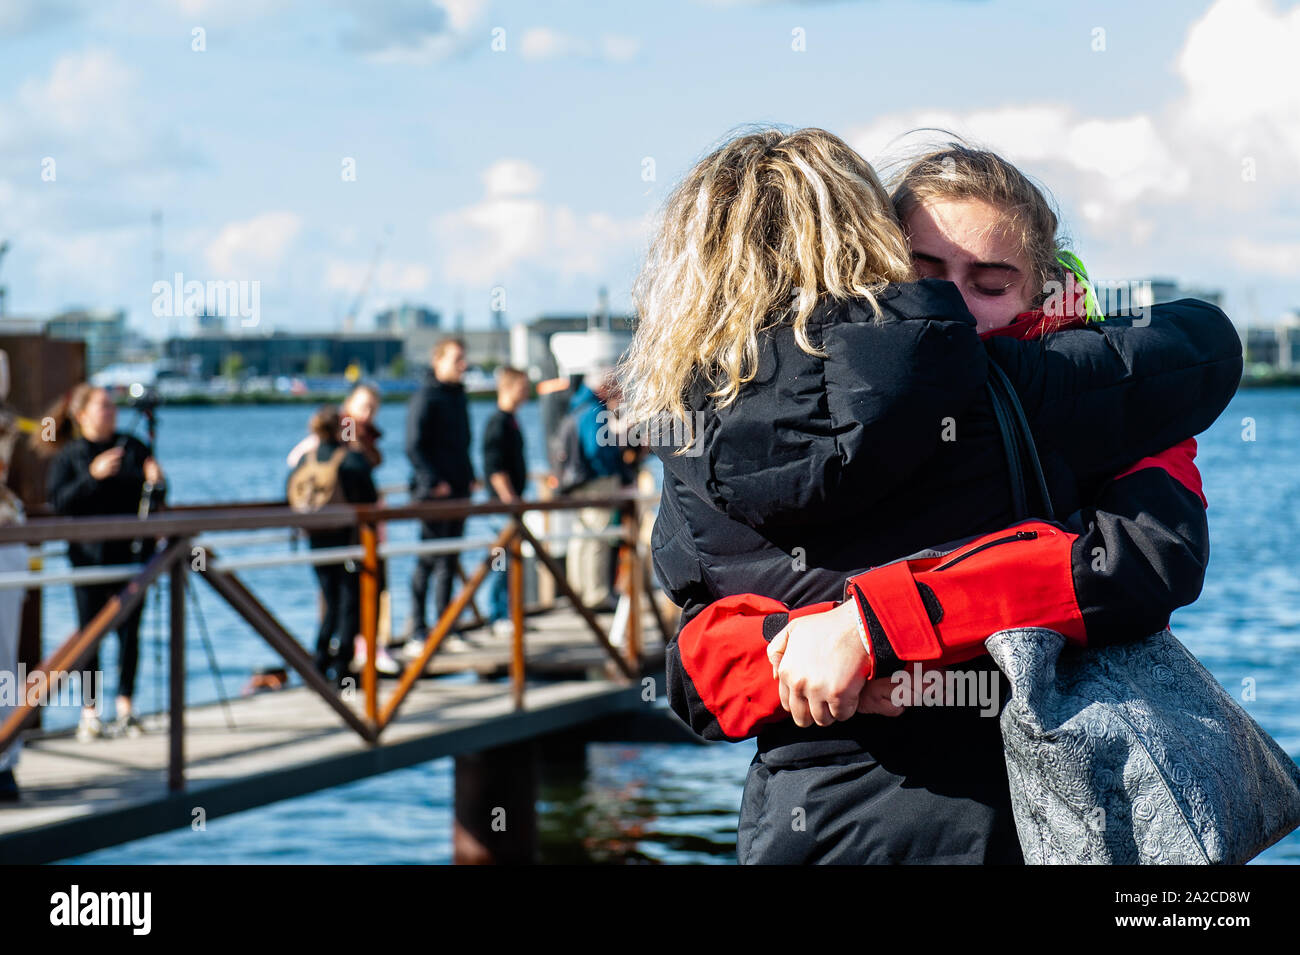 Belgian climate activist, Adélaïde Charlier is seen  saying goodbye to her mother before departing.From the NDSM Wharf in Amsterdam, 36 climate activists are sailing out to go to the UN Climate Conference in Santiago, Chile. Between them, there is Anuna de Weber, who is the organizer of the Climate Strikes in Belgium and Adélaïde Charlier, French-speaking coordinator for the 'Youth for climate' movement. Their mission as Greta Thunberg already did, is decrease the climate impact of traveling. They will be sailing for around 7 weeks to Rio de Janeiro, and from there they will travel by bus. Stock Photo